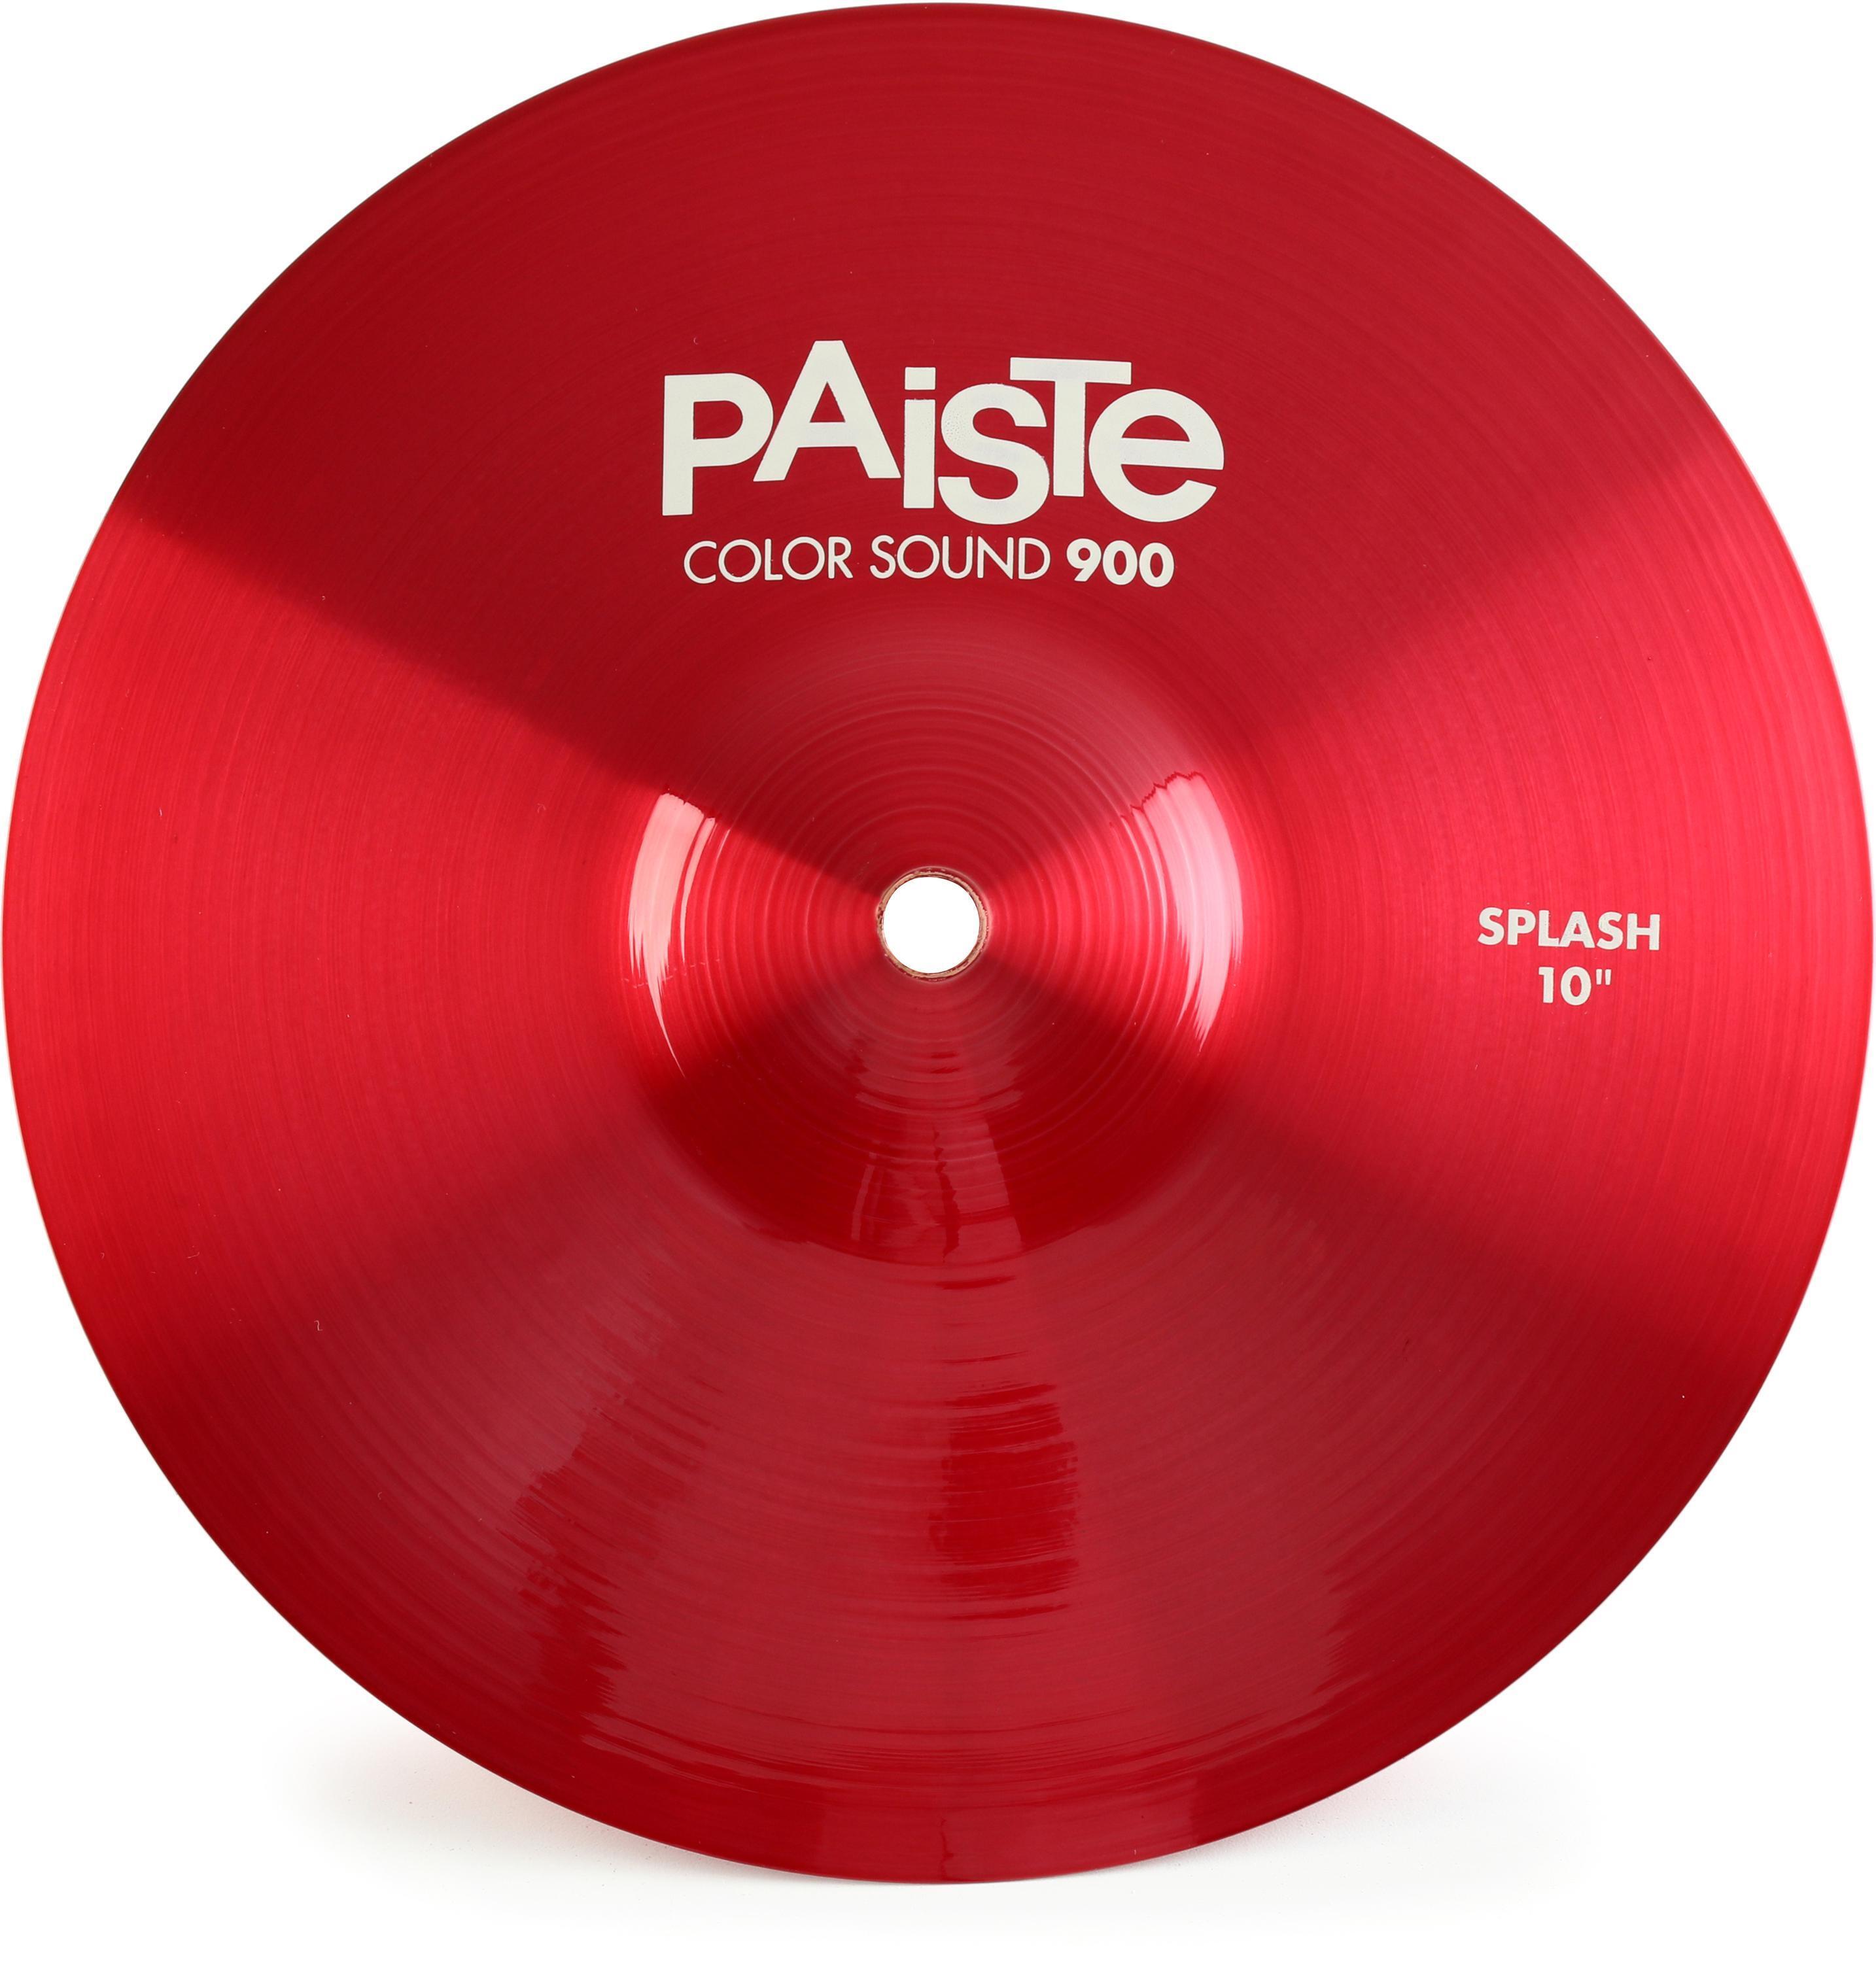 Paiste 10 inch Color Sound 900 Red Splash Cymbal | Sweetwater